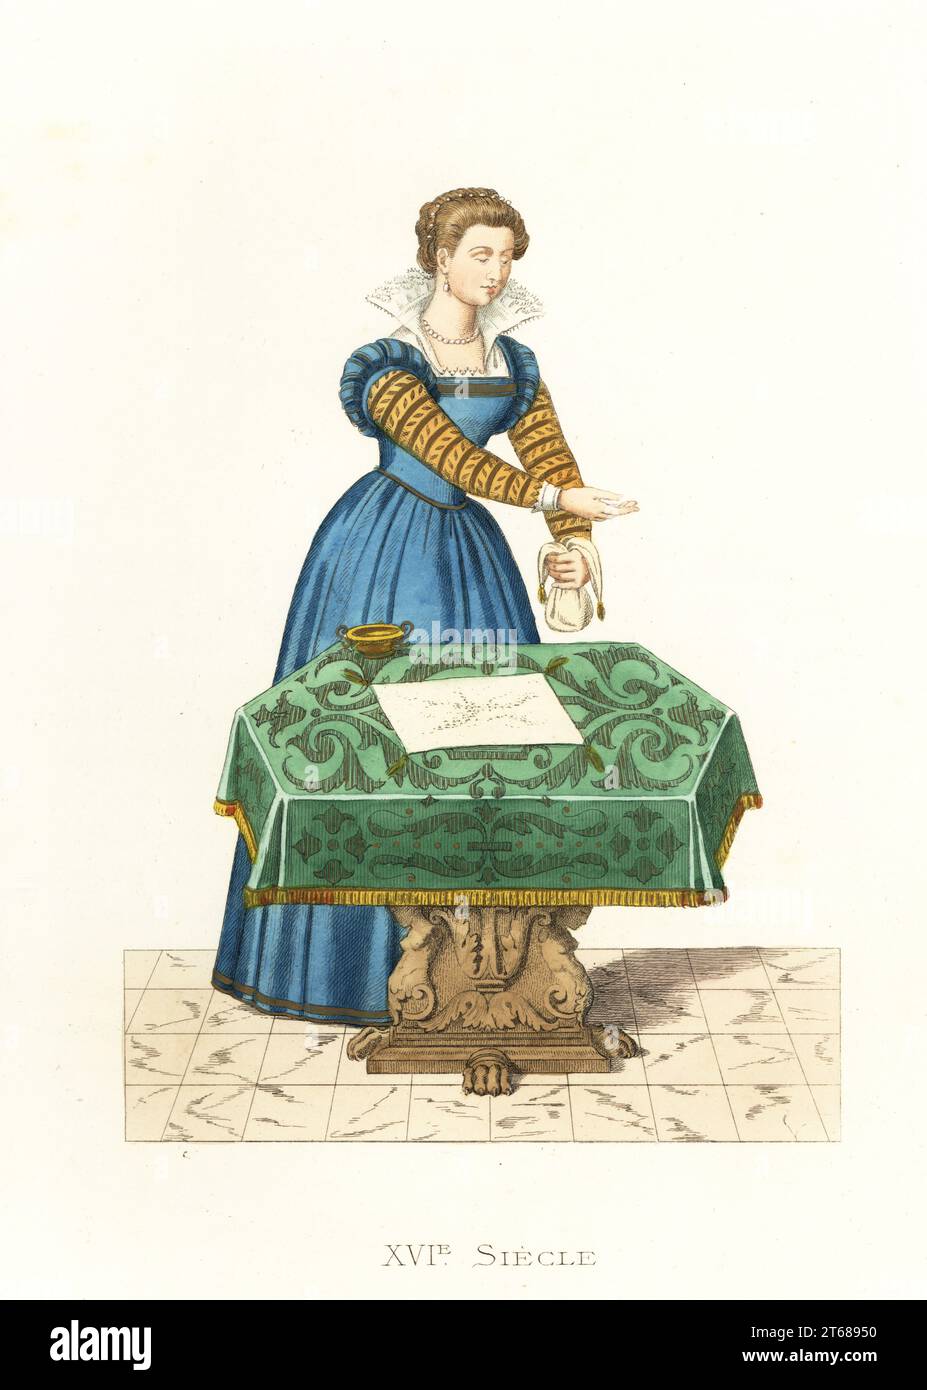 Young Venetian woman separating silk eggs. She wears a blue gown with gold sleeves, lace fan collar, blonde hair with pearl band. She stands before a table about to pour silk eggs into a glass of warmed Malvasia wine. Jeune Venetienne. After a handcoloured woodcut in Dialoghi di Magino Gabrielli Hebreo Venetiano, 1588, a book about extracting silk thread from the cocoon twice a year.. Handcolored lithograph after an illustration by Edmond Lechevallier-Chevignard from Georges Duplessis's Costumes historiques des XVIe, XVIIe et XVIIIe siecles (Historical costumes of the 16th, 17th and 18th centu Stock Photo